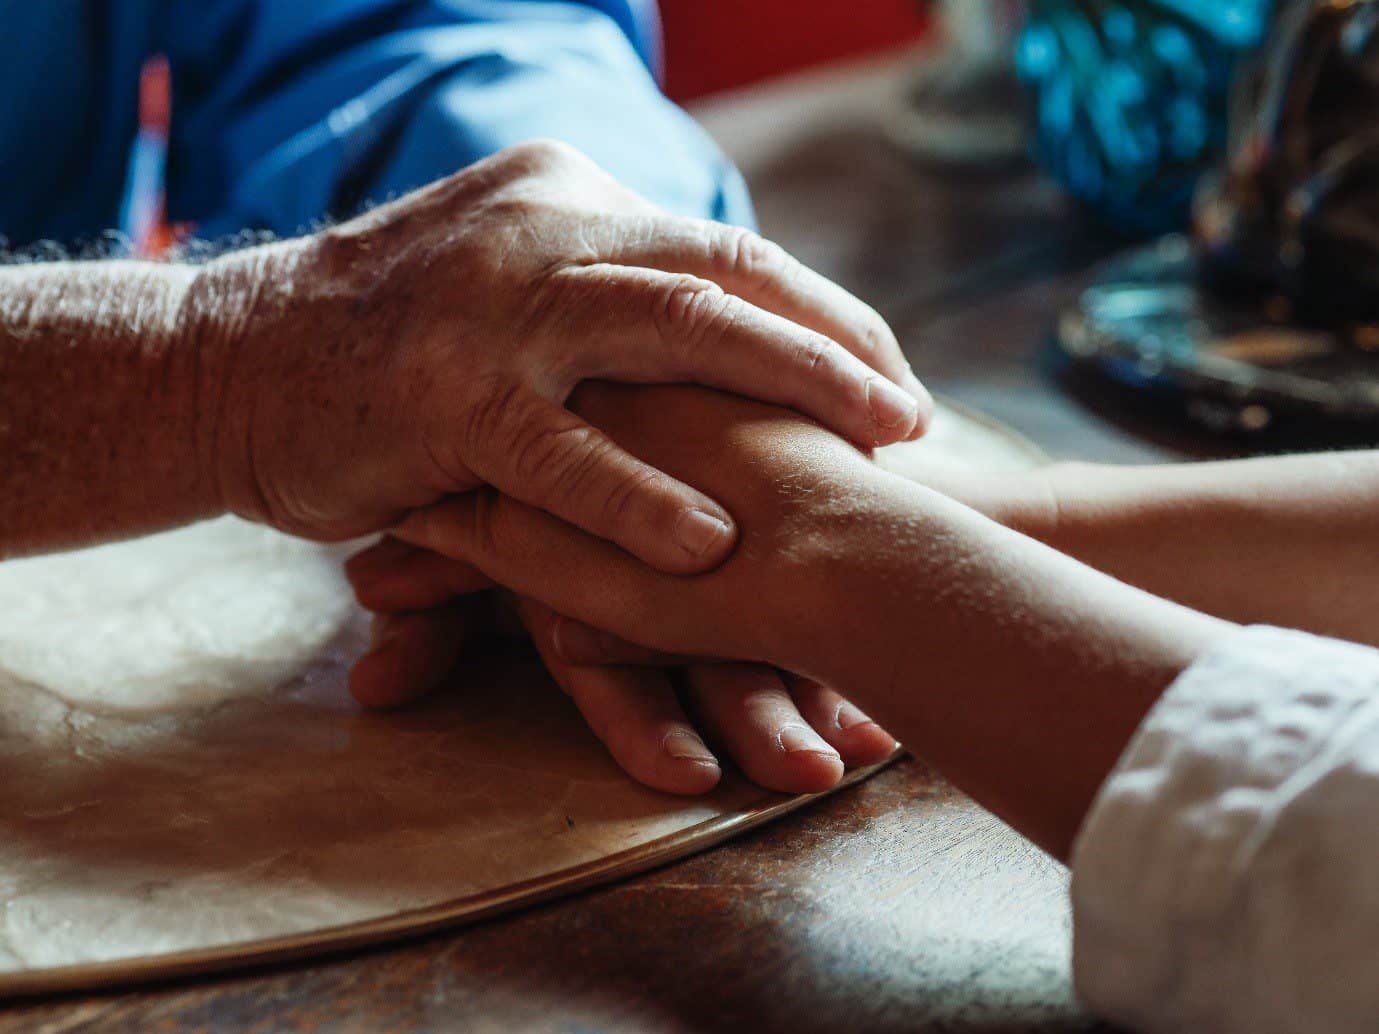 When should someone be offered palliative care?